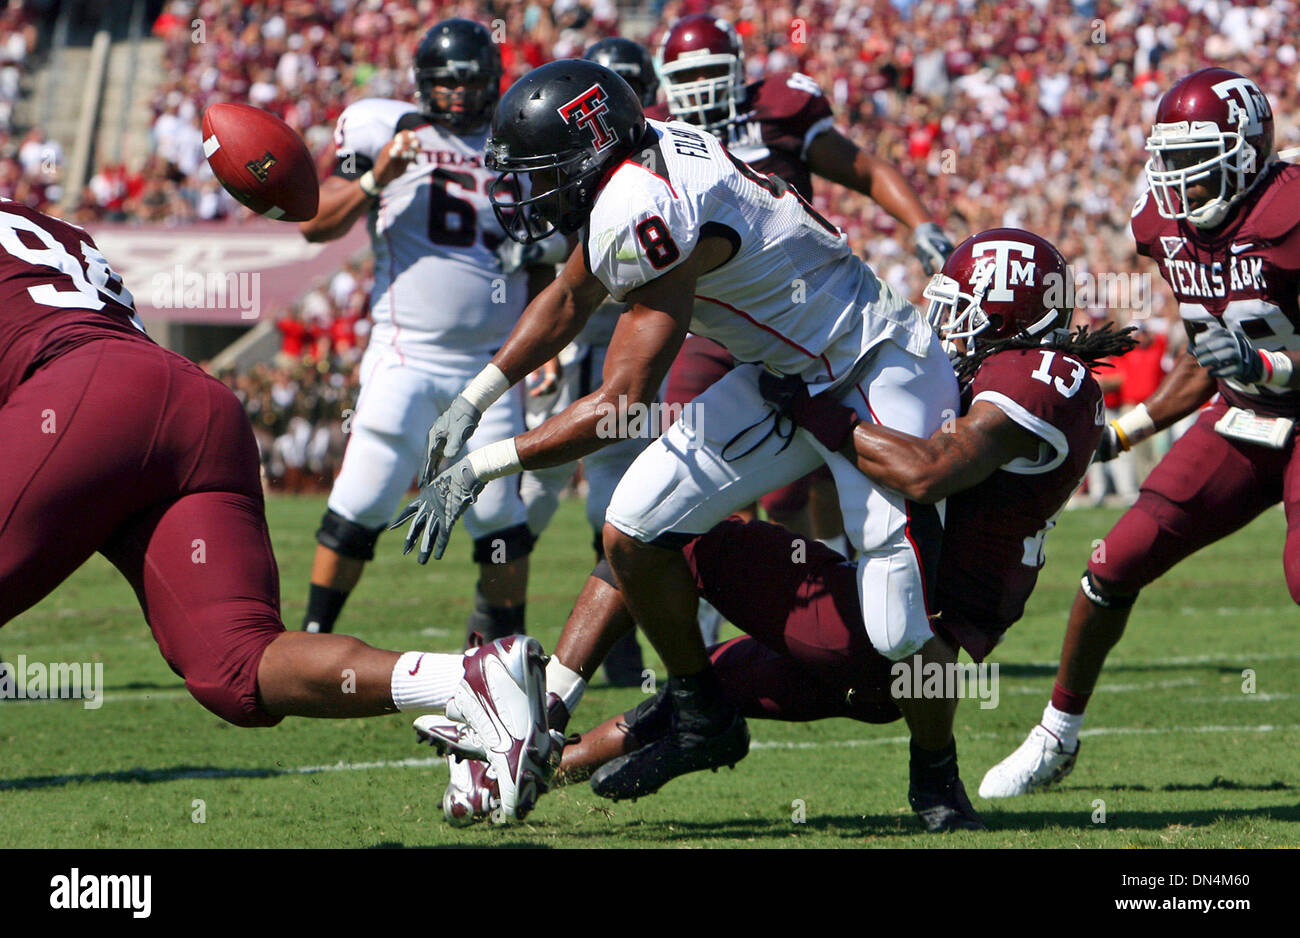 Sep 30, 2006; College Station, TX, USA; NCAA Football: Texas Tech's JOEL FILANI fumbles the ball as he is tackled by Texas A&M's MARQUIS CARPENTER Saturday Sept. 30, 2006 at Kyle Field in College Station.  Mandatory Credit: Photo by E.A. Ornelas/San Antonio Express-News/ZUMA Press. (©) Copyright 2006 by San Antonio Express-News Stock Photo